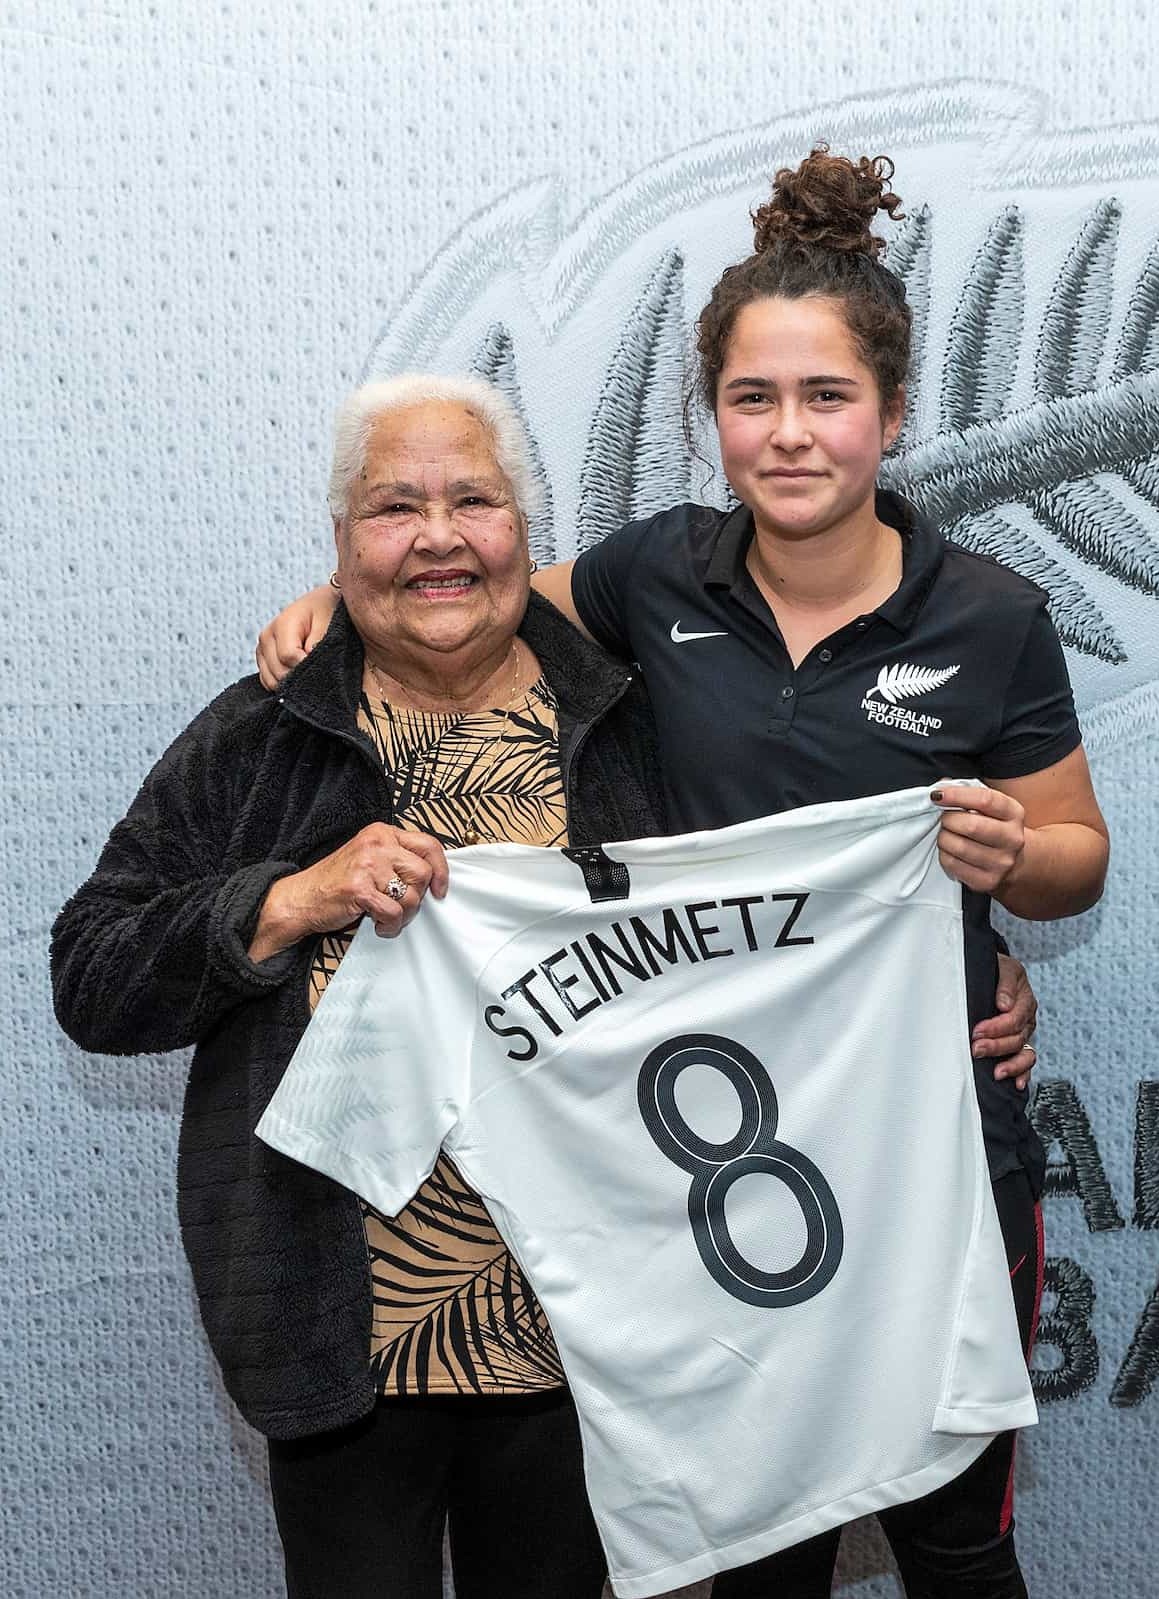 Malia With Her Grandmother At Her FIFA U-20 Women's World Cup 2018 Shirt Presentation